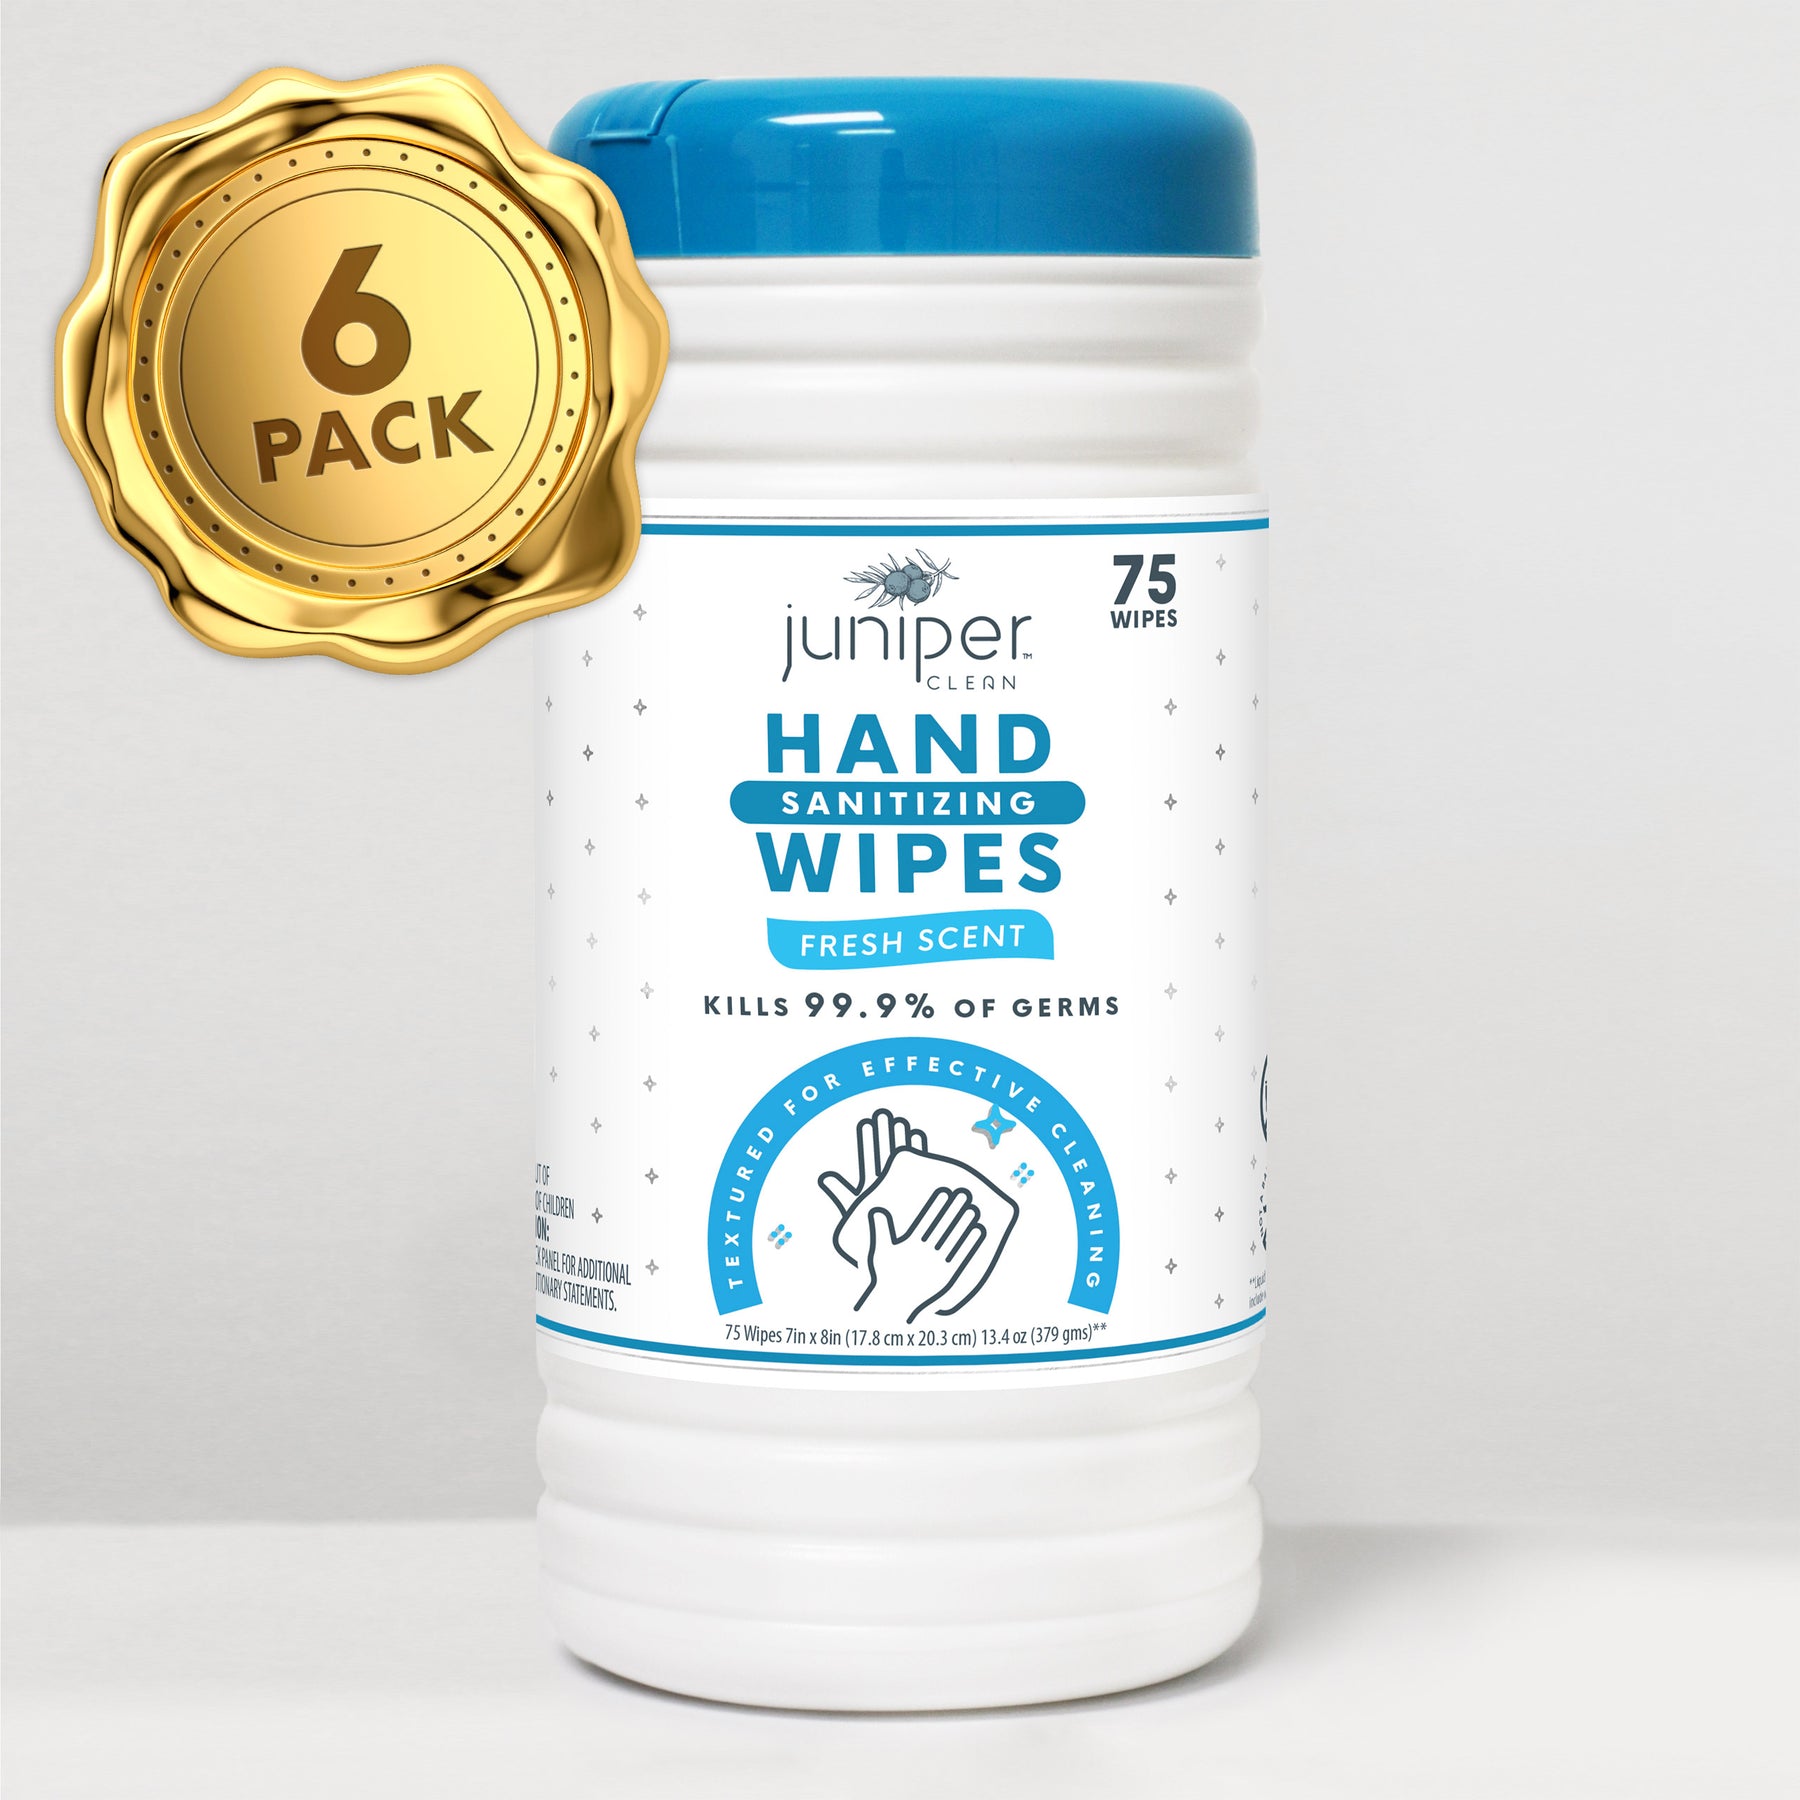 TKO Hand Cleaning Wipes Case (6 Canisters)